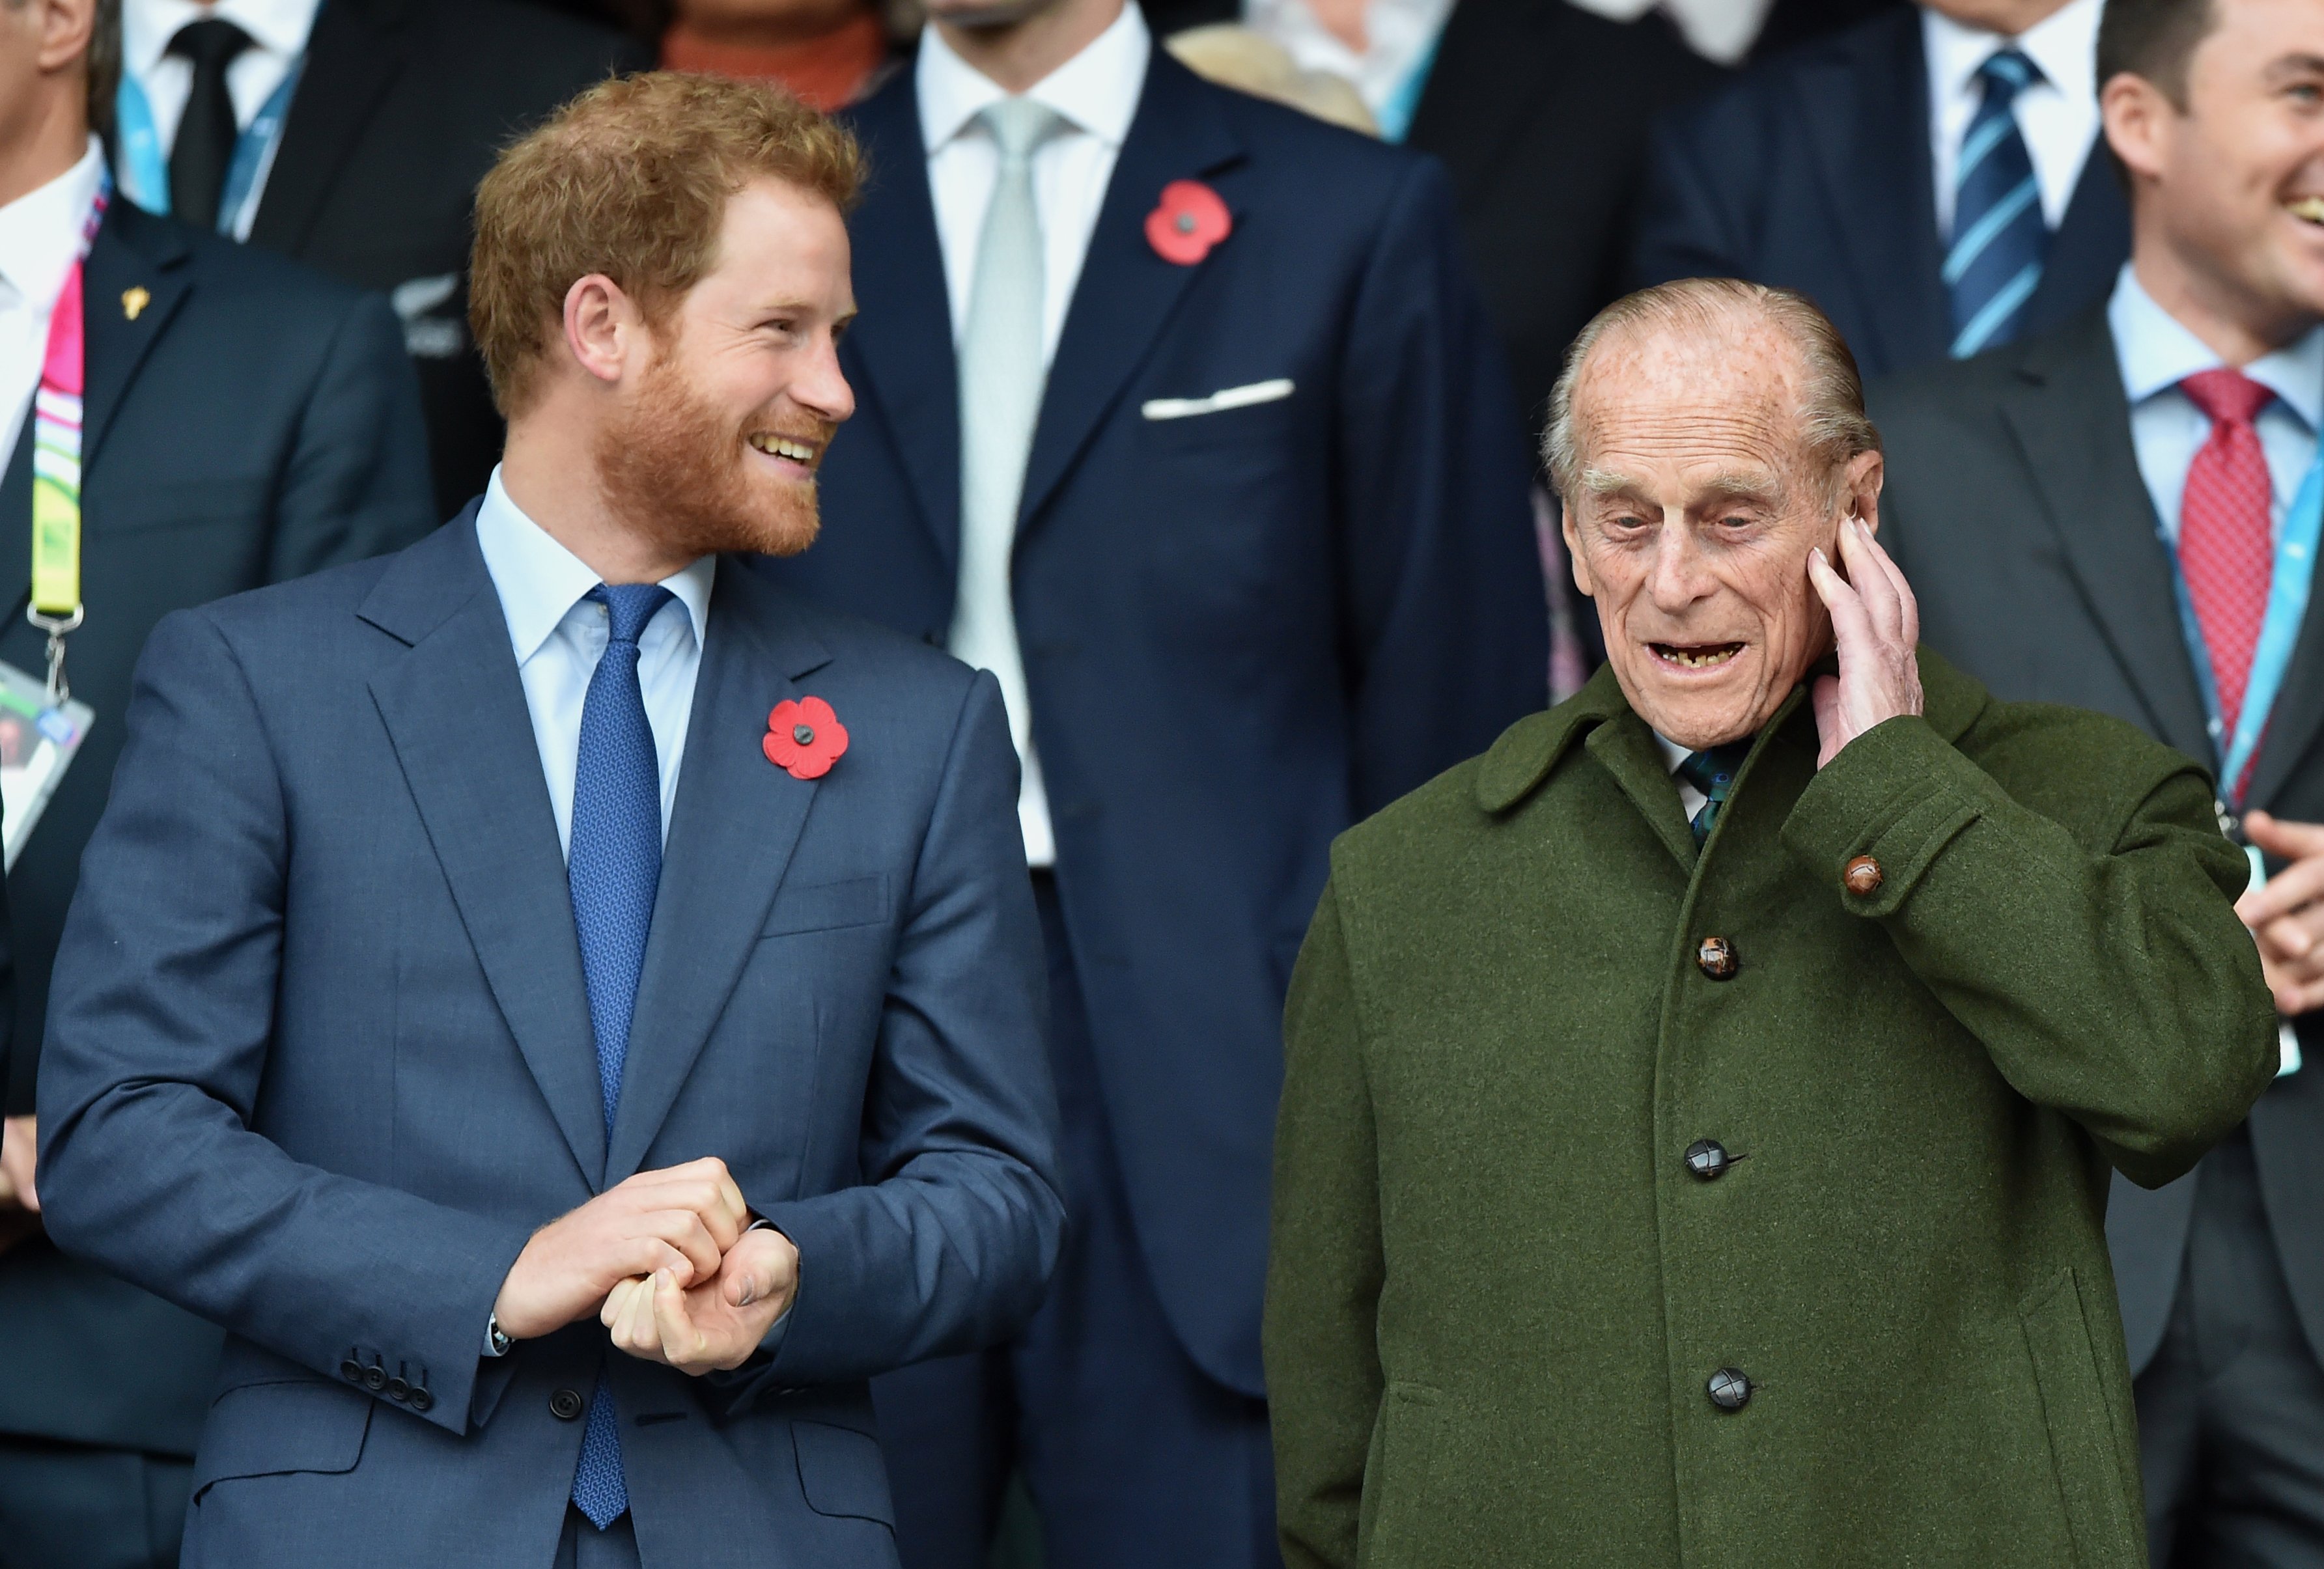 Prince Harry and Prince Philip, Duke of Edinburgh, attend the 2015 Rugby World Cup Final match between New Zealand and Australia at Twickenham Stadium on October 31, 2015 in London, England | Source: Getty Images 